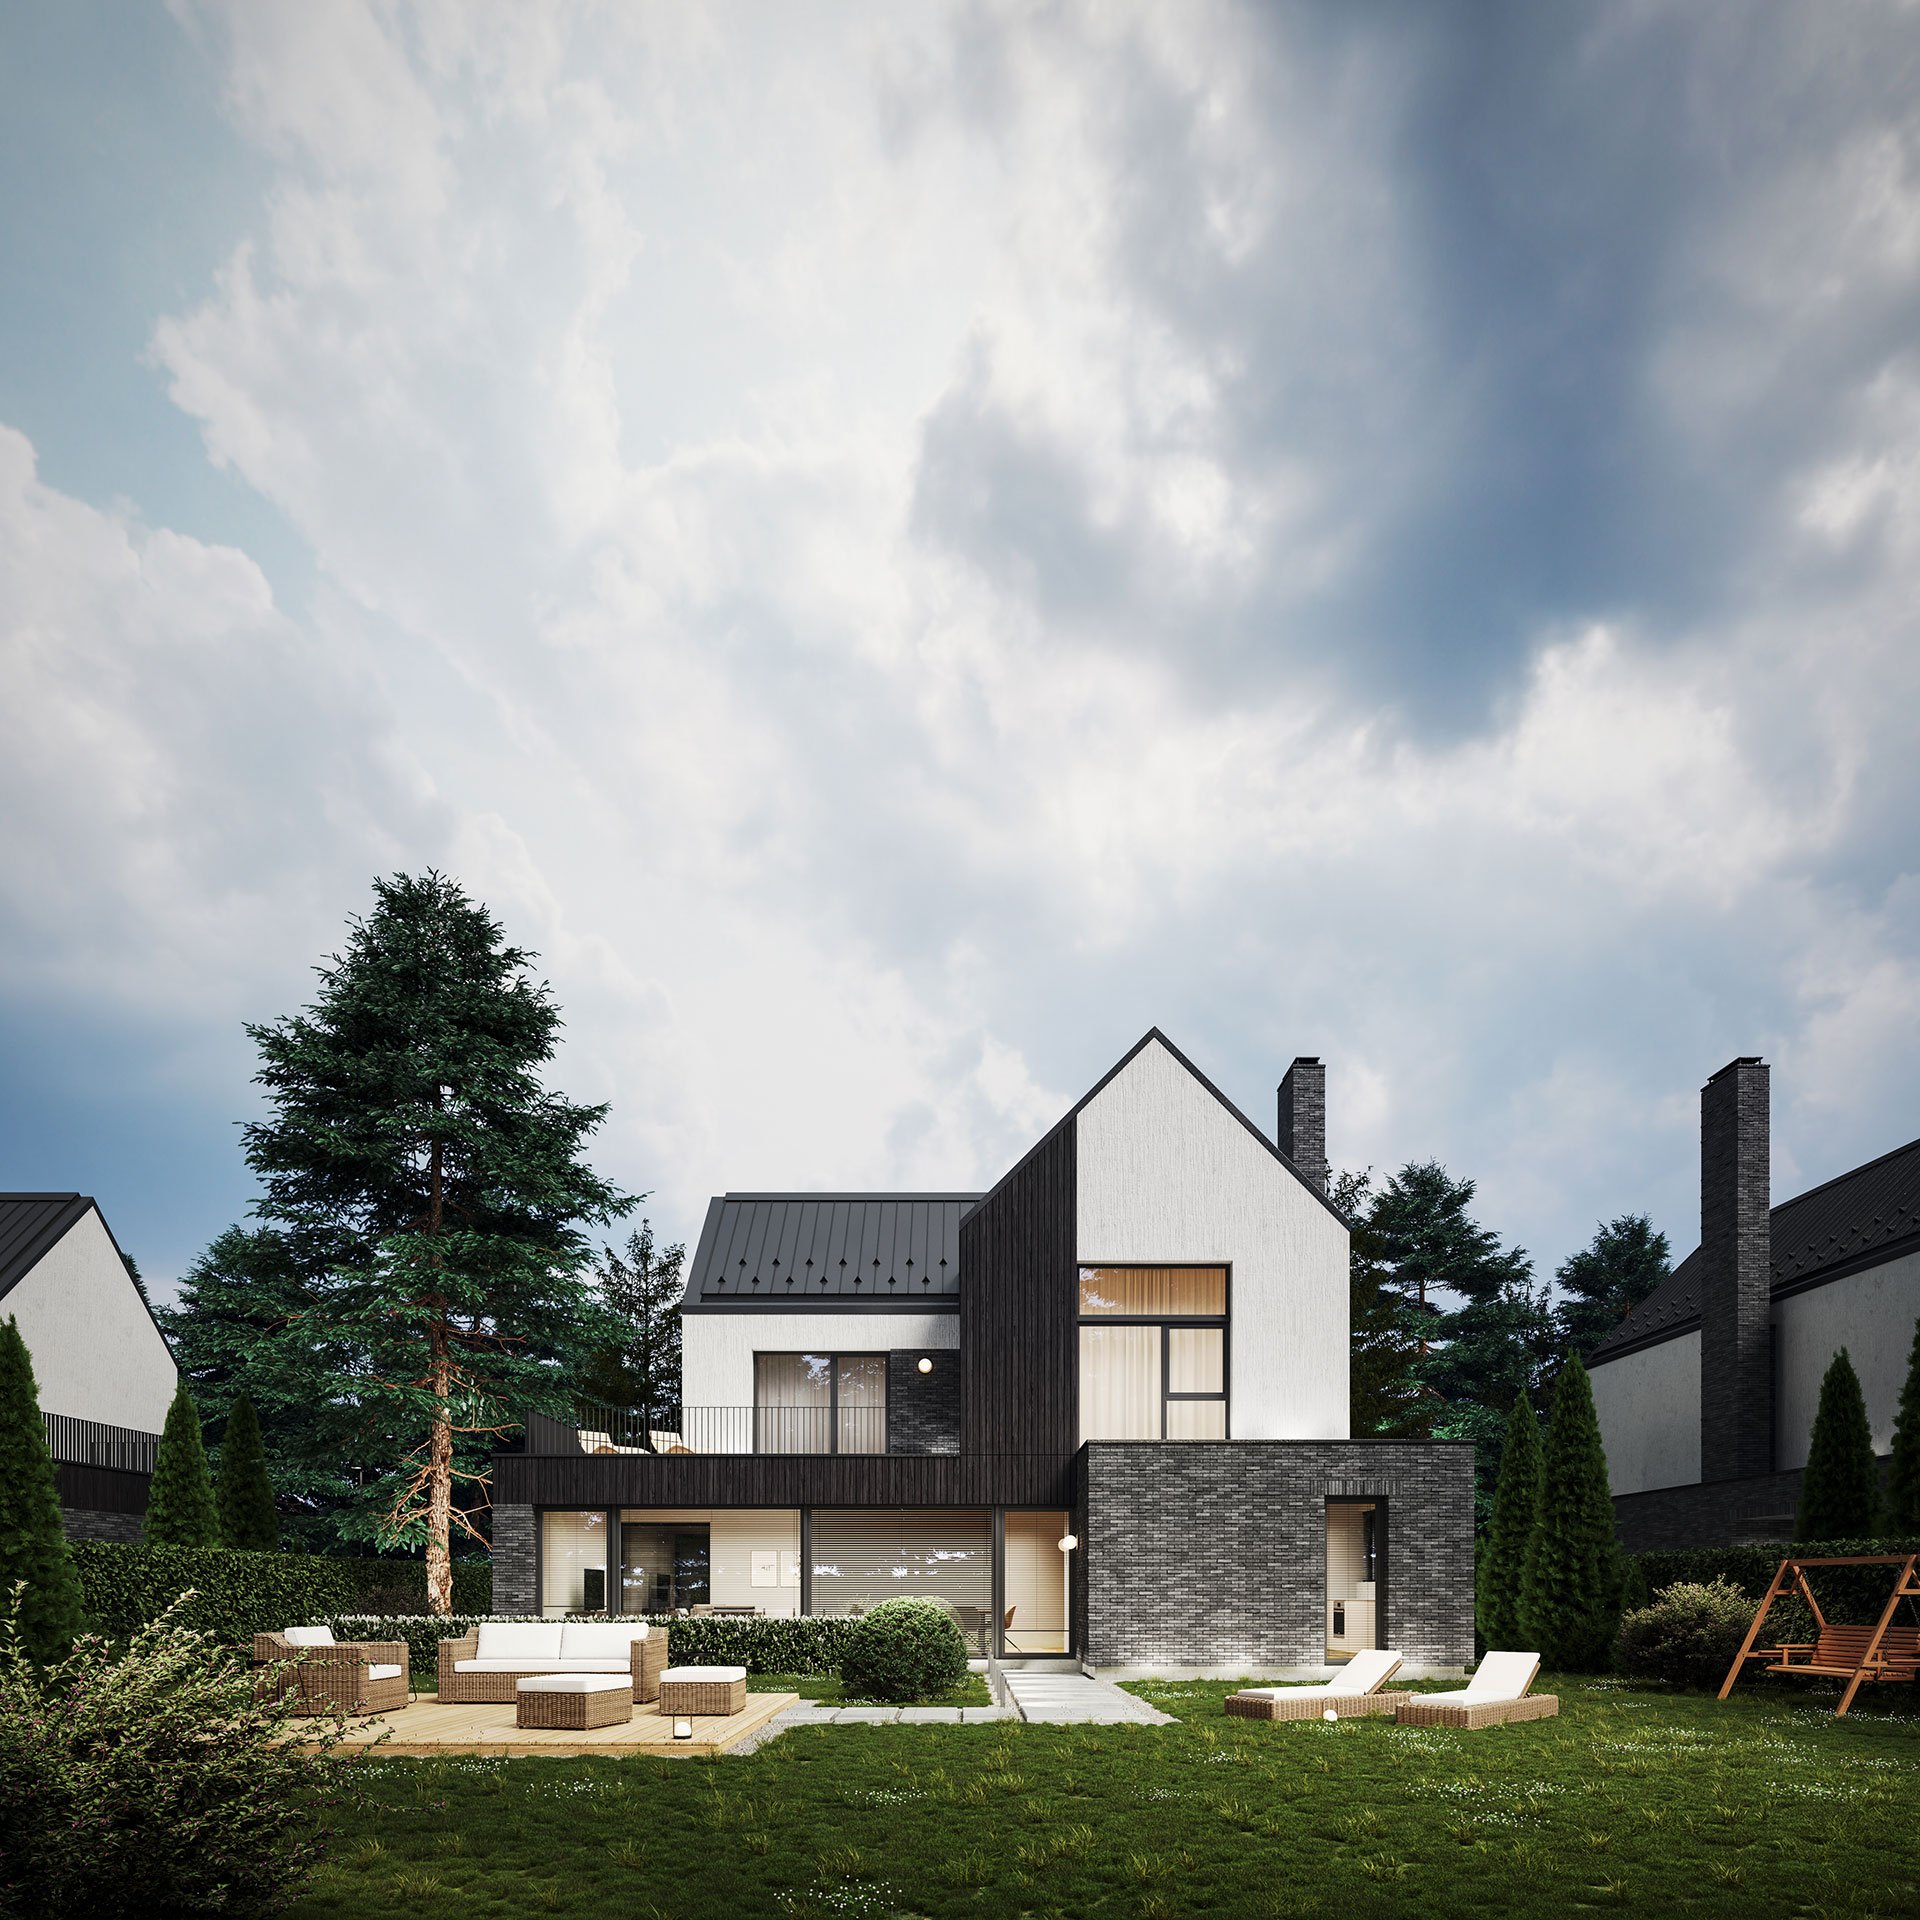 Breaking-Clouds_DL1 House_Architectural-Rendering_A.jpg